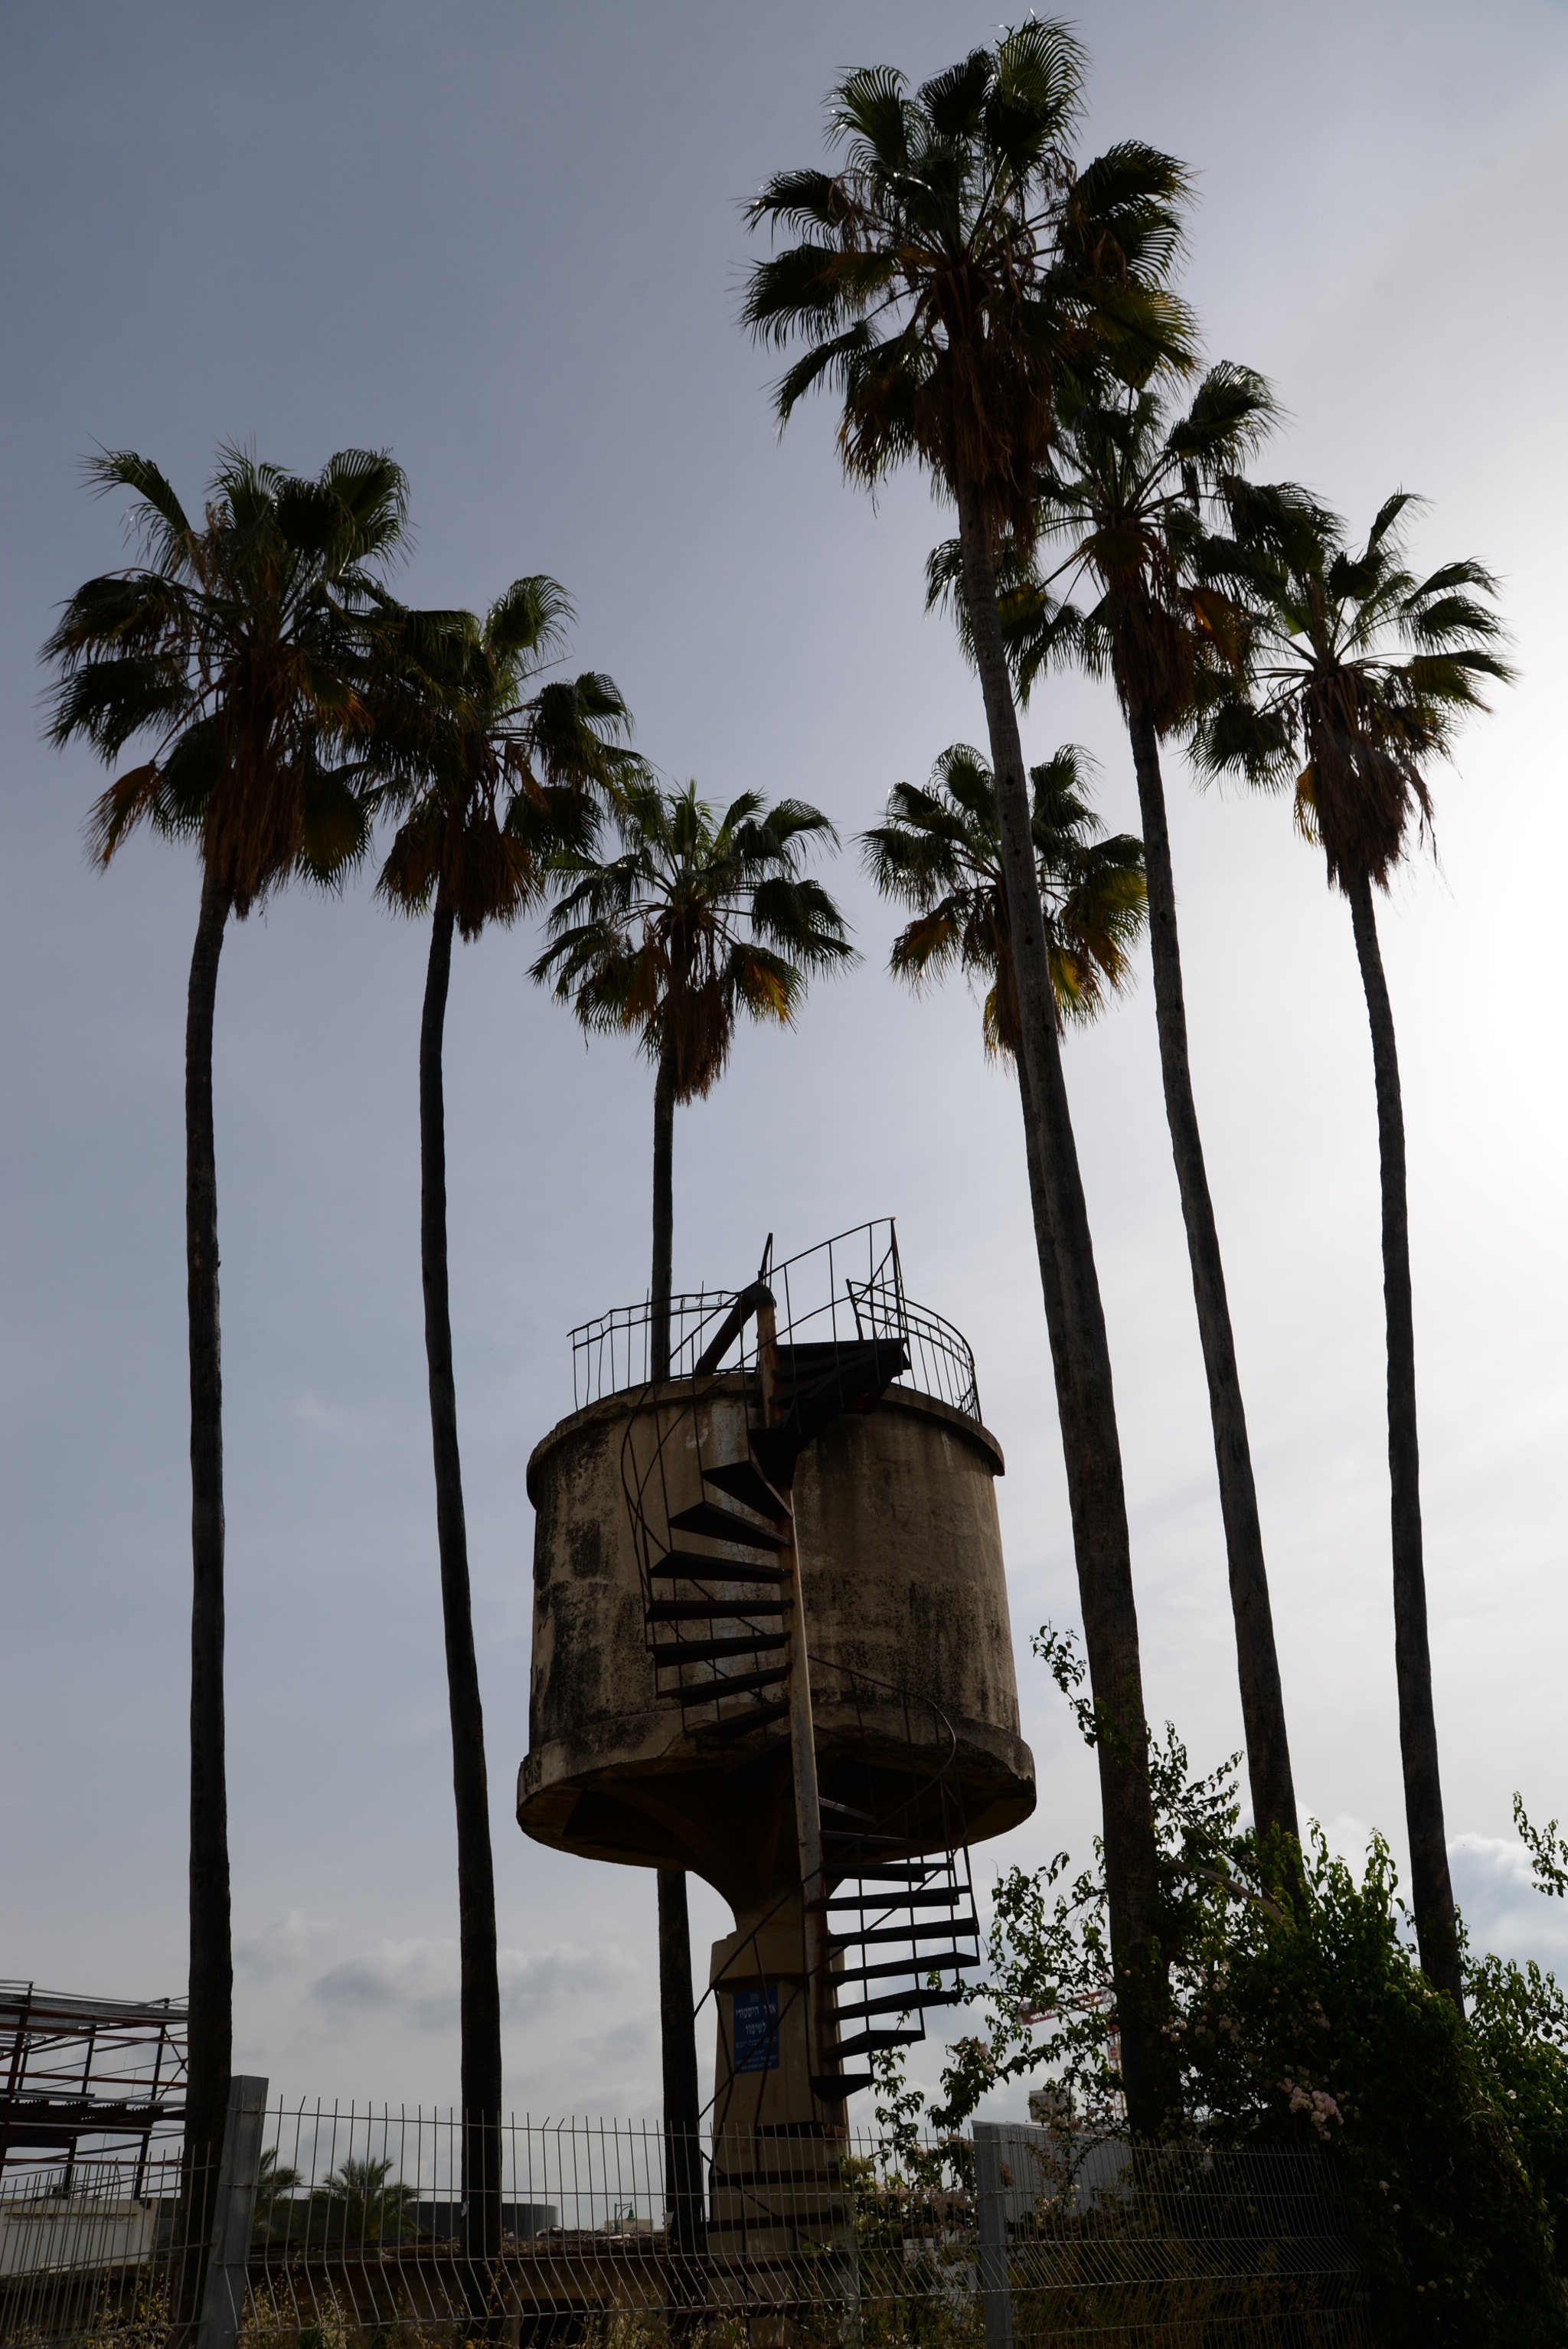 Nikon D610 + Sigma 24-105mm F4 DG OS HSM Art sample photo. The old water tower photography